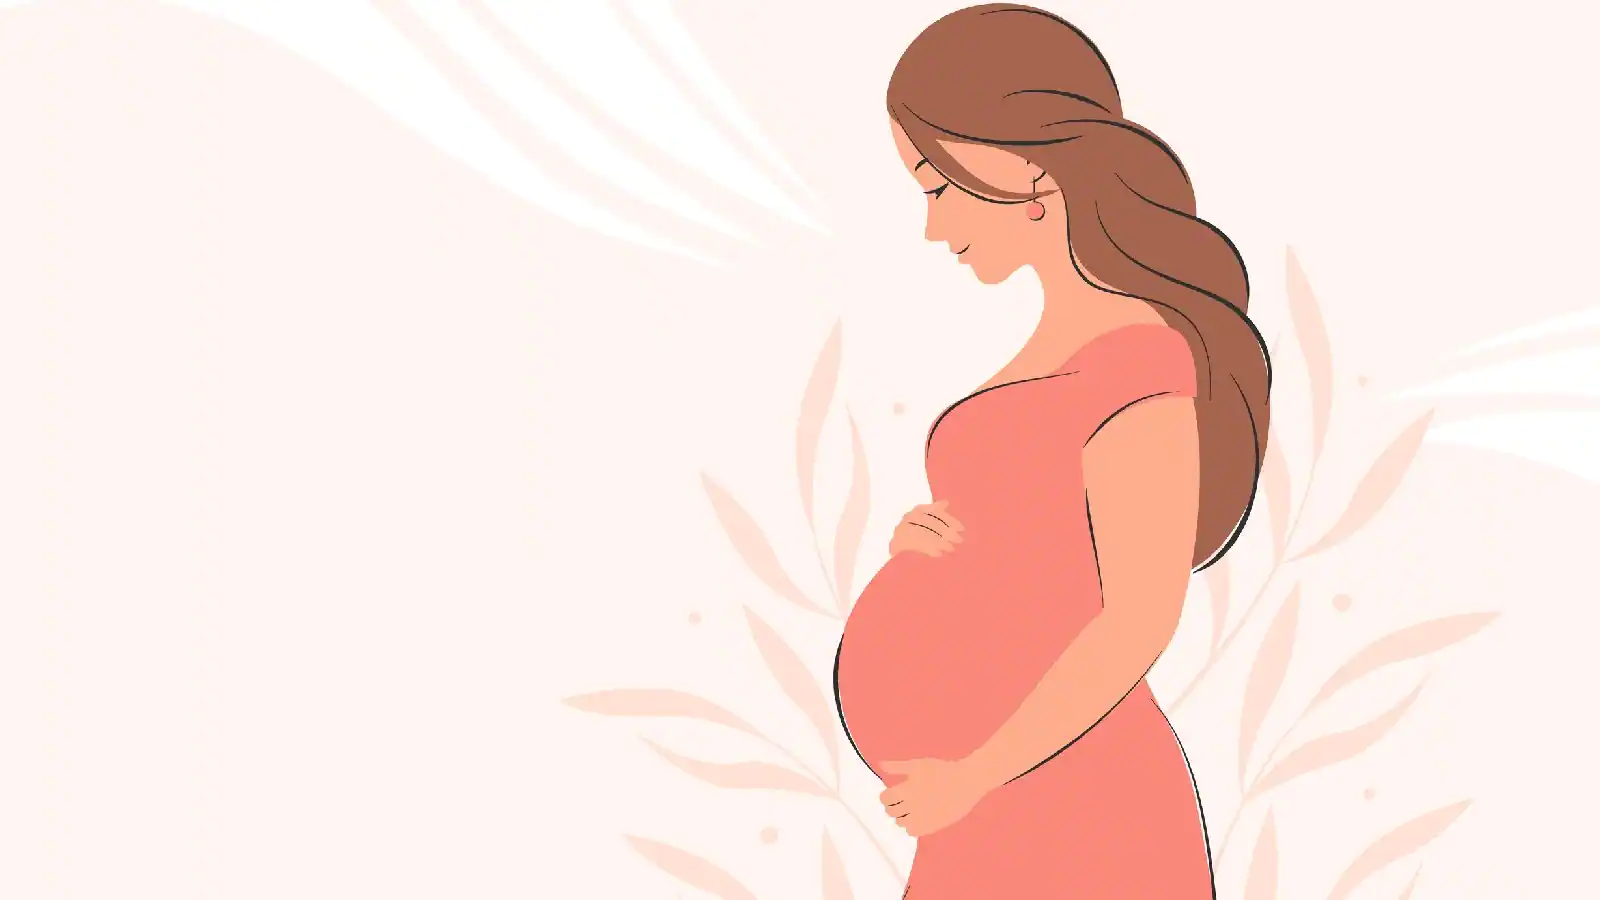 Stay Healthy During Pregnancy